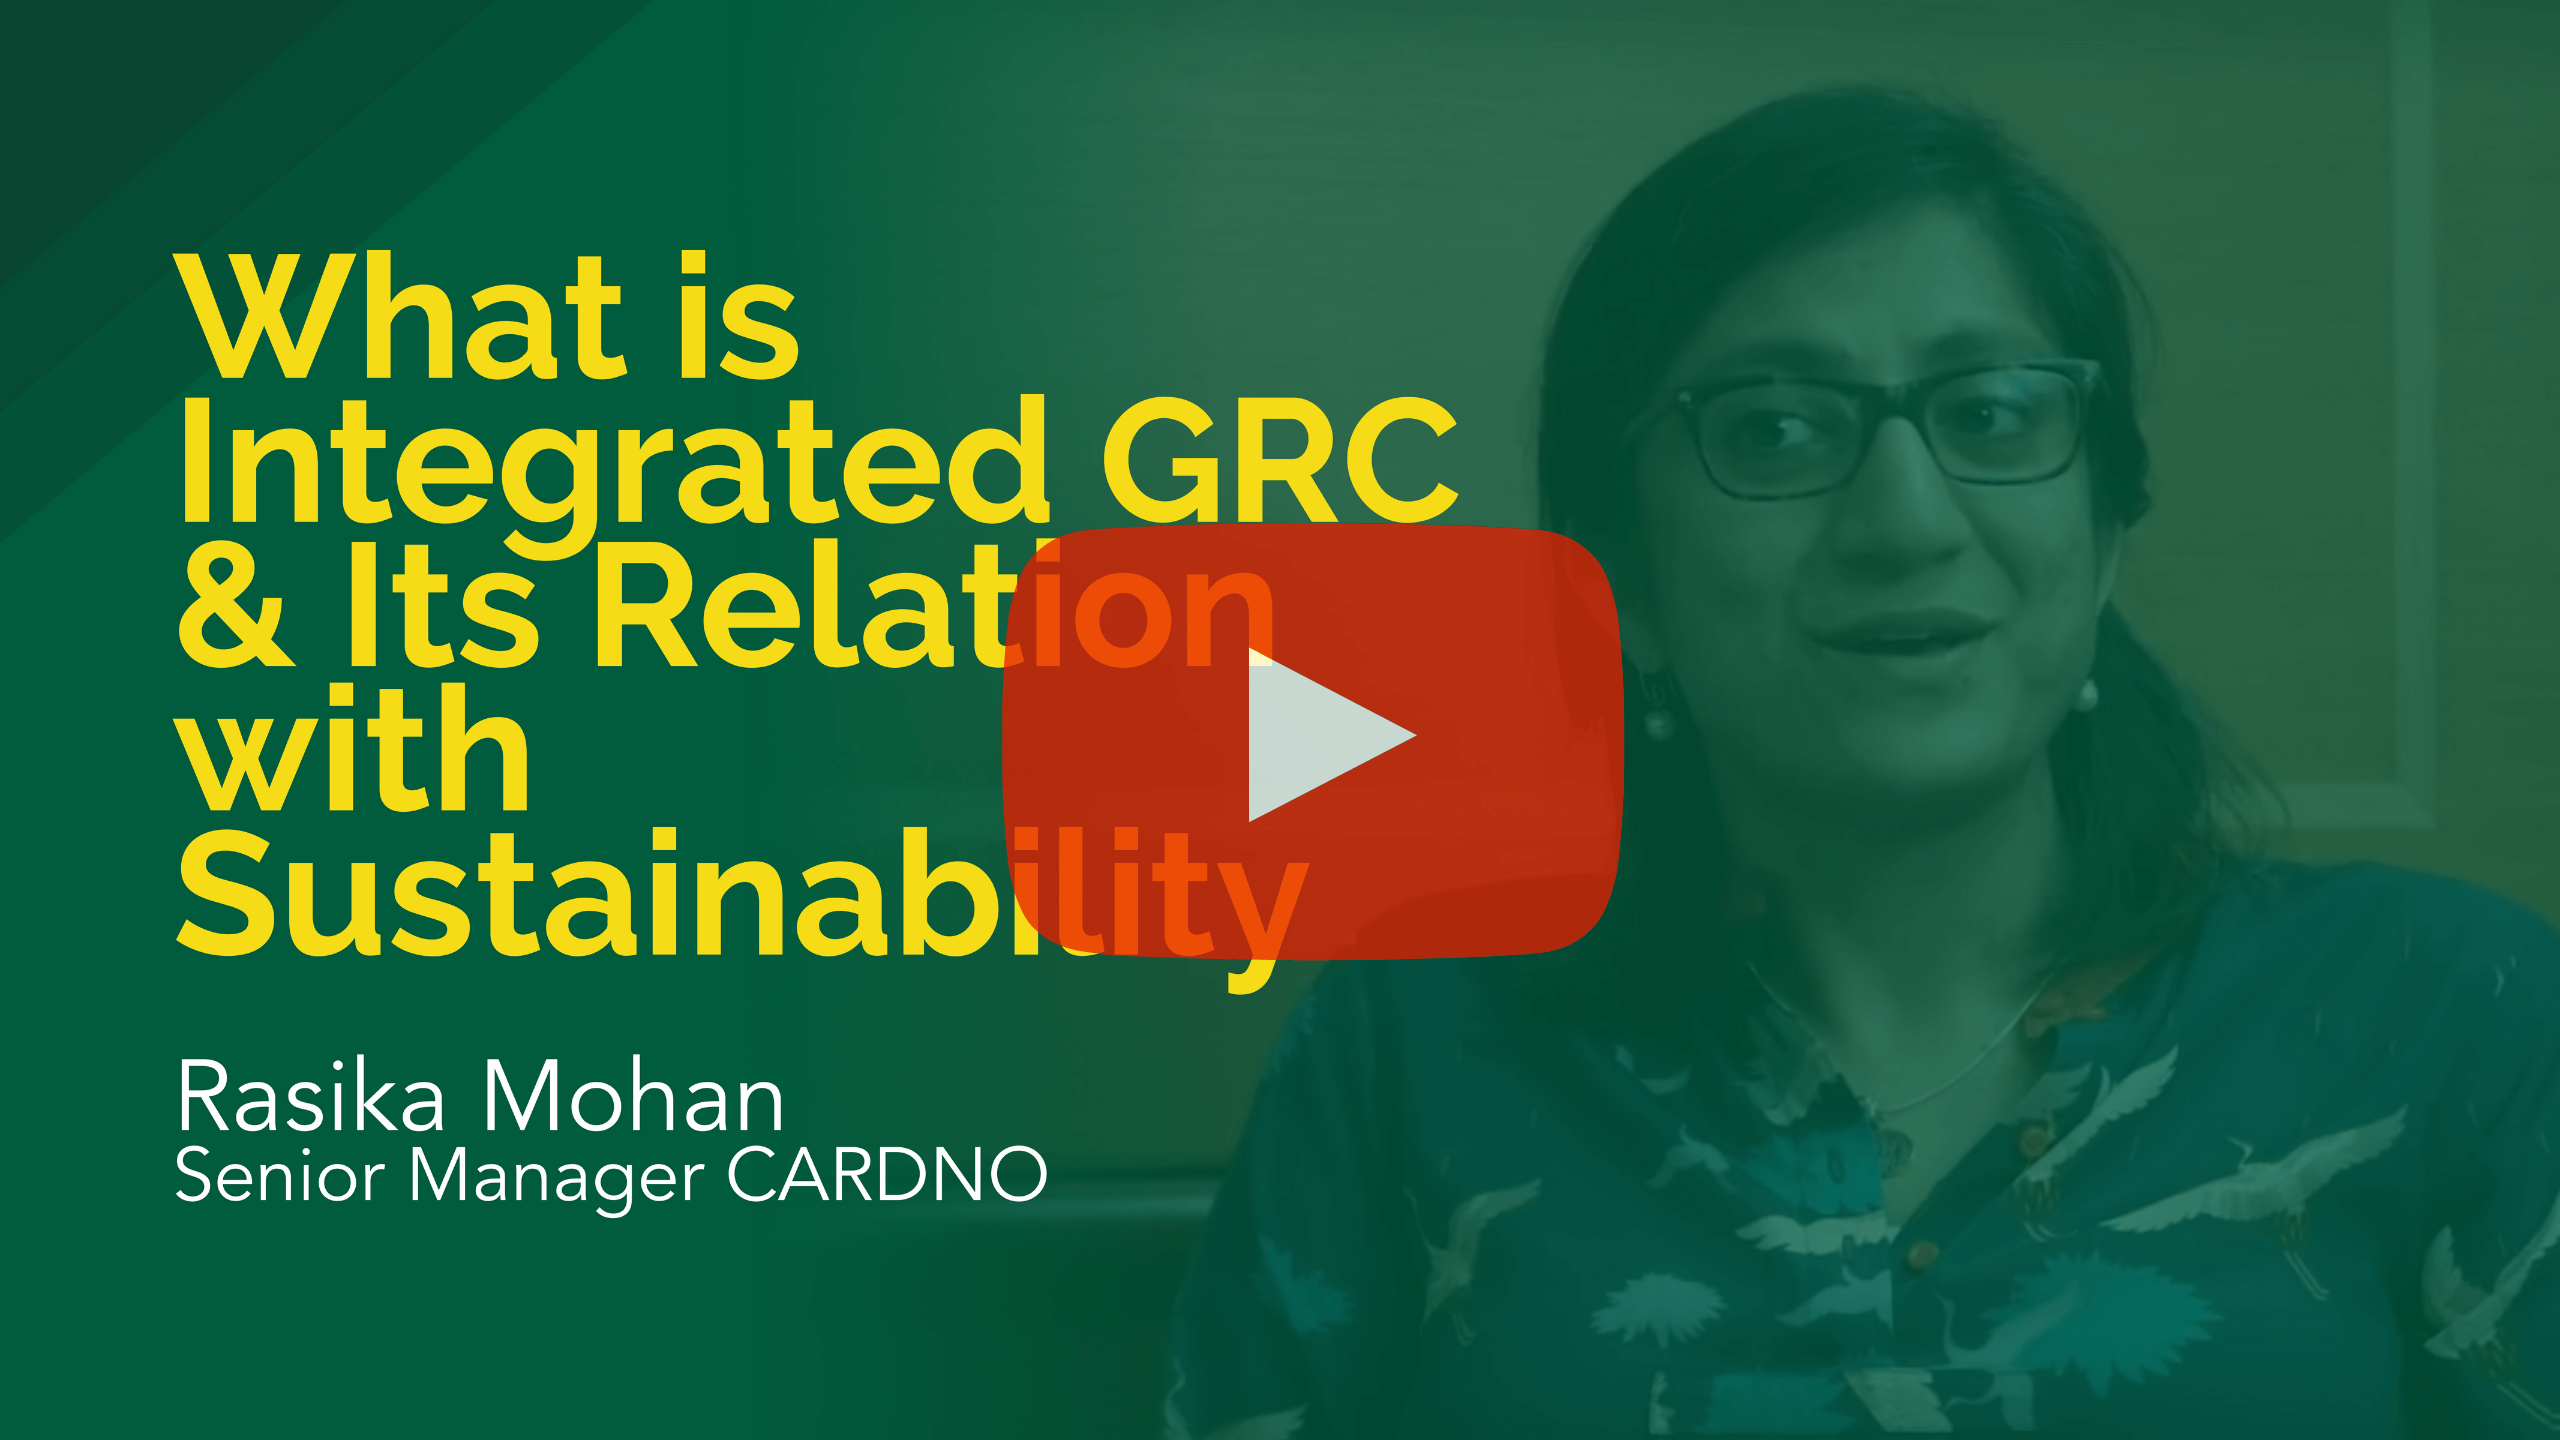 What is Integrated GRC & Its Relation with Sustainability